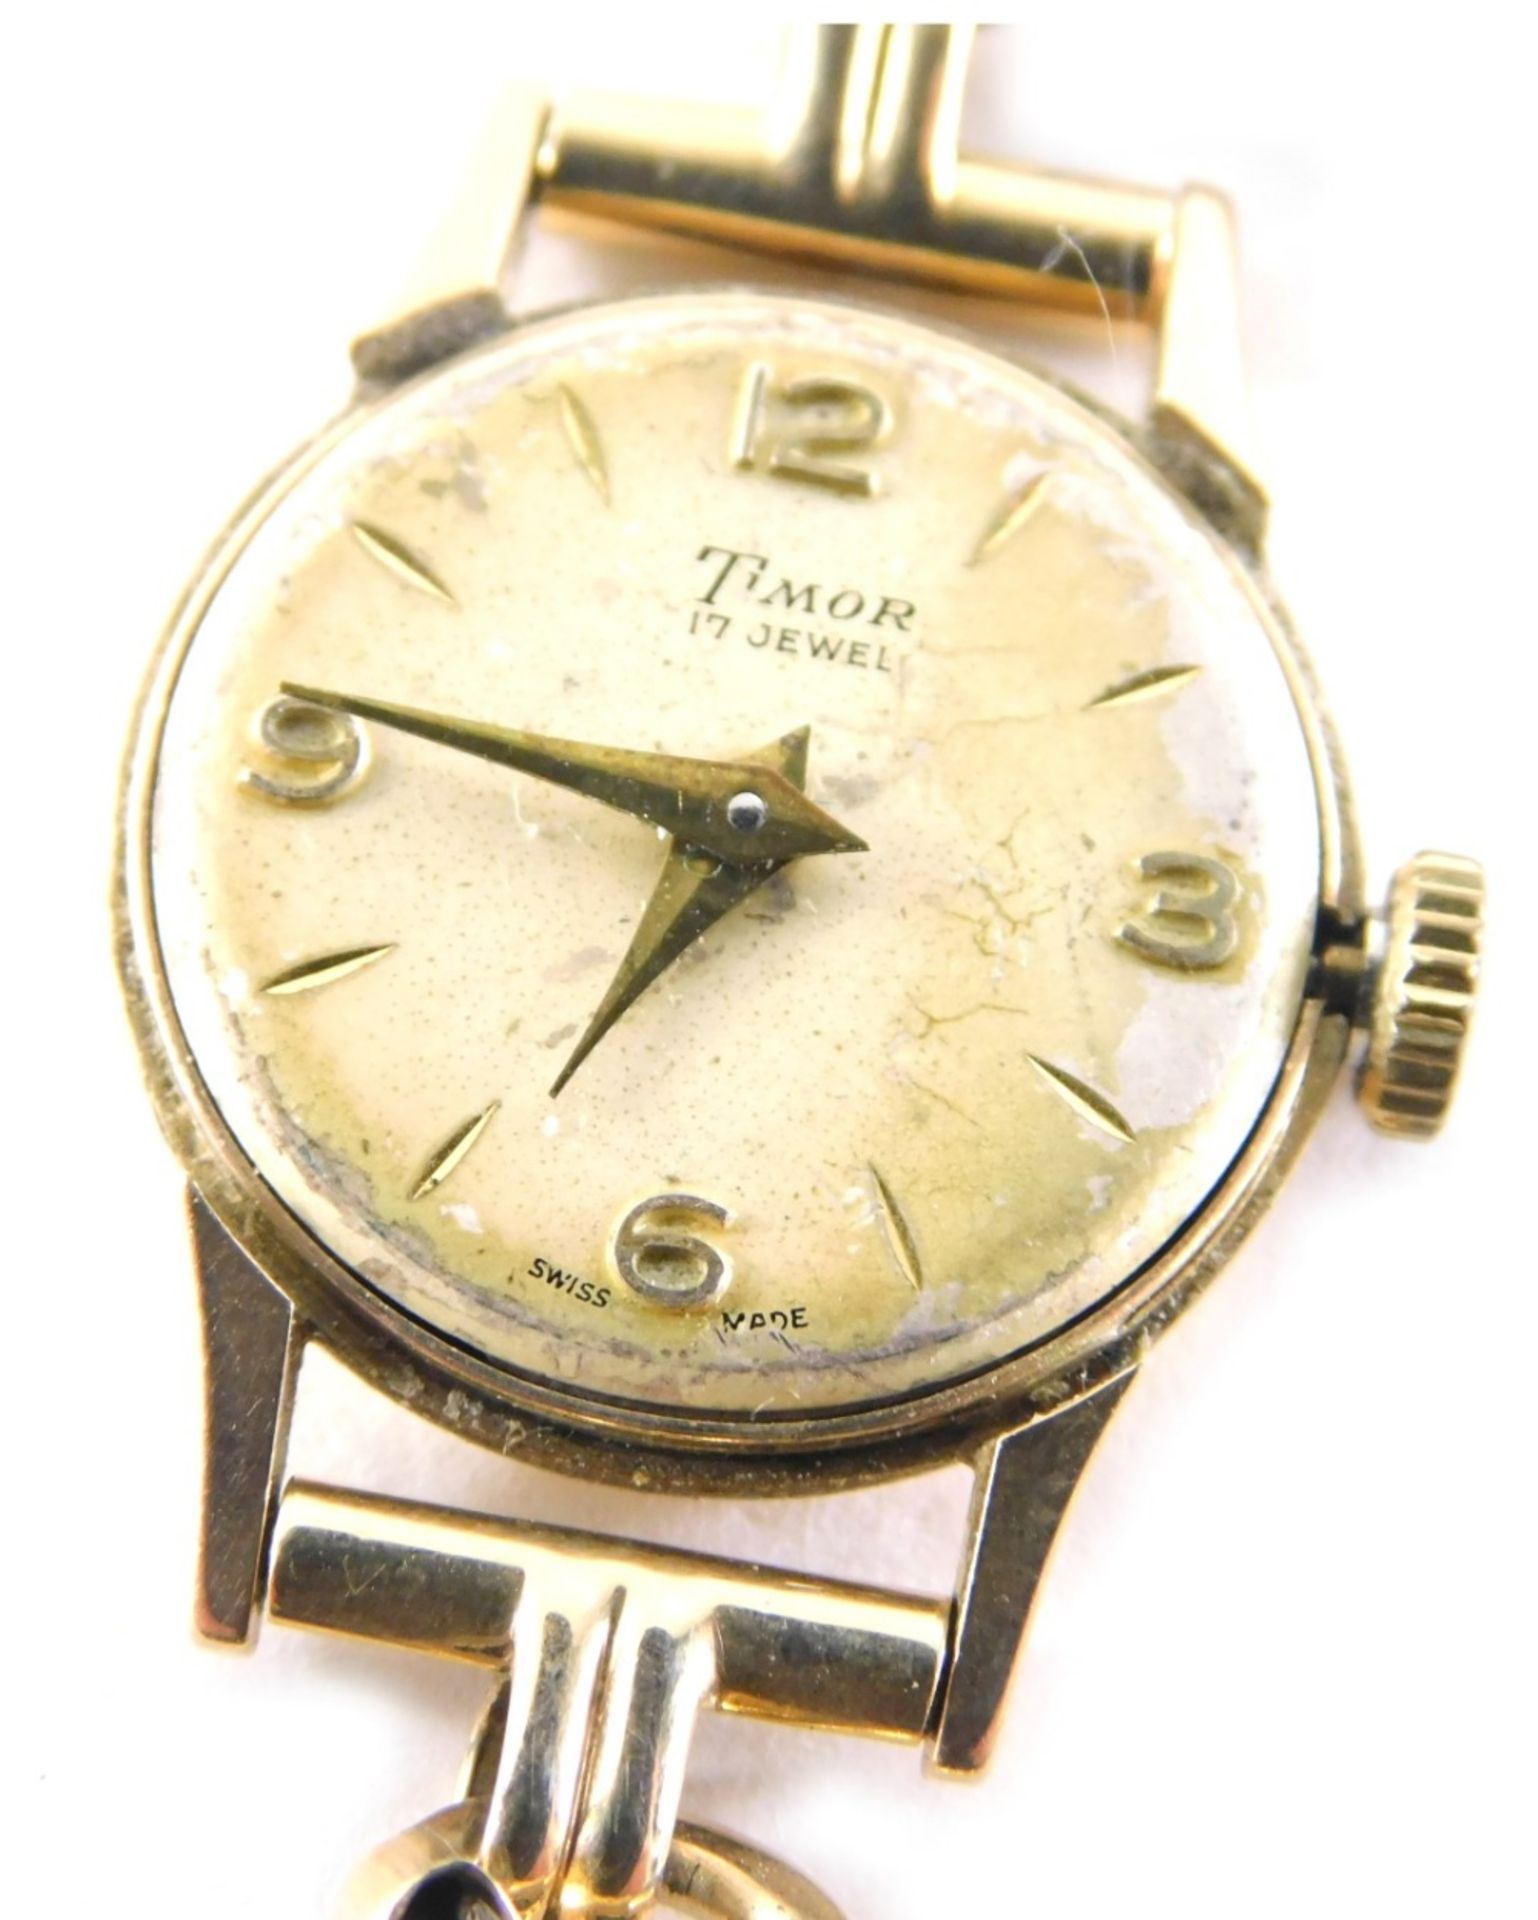 A 9ct gold Timor ladies wristwatch, with V splayed bracelet and safety chain, lacking glass covering